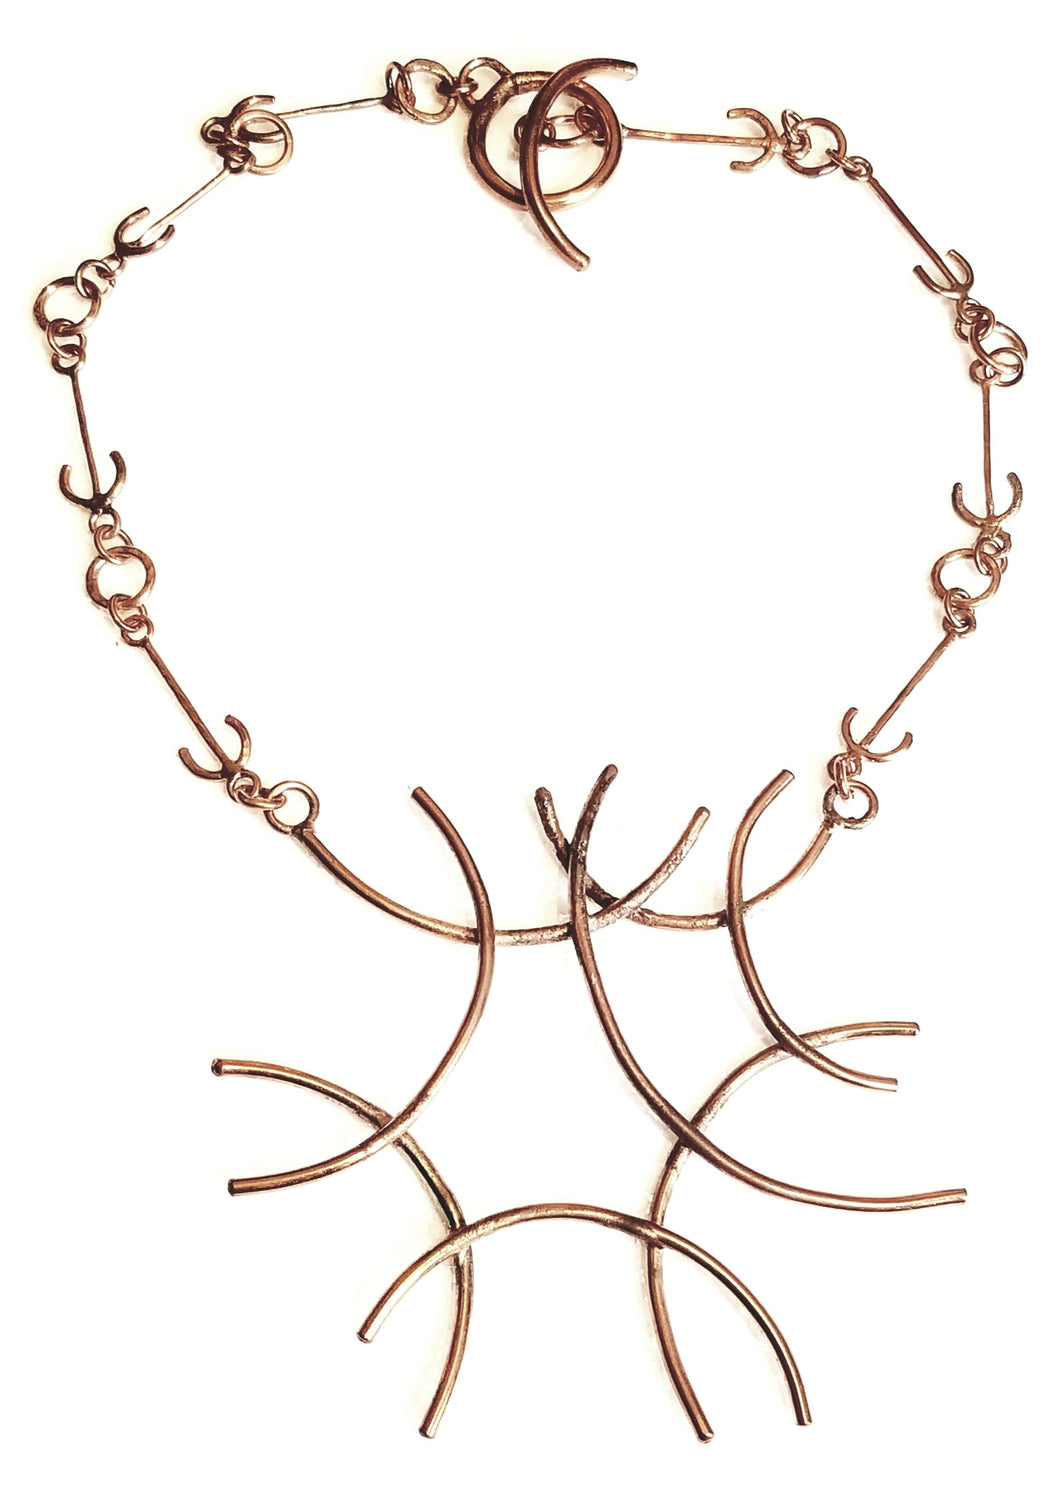 Copper Metal Hand Forged Overlapping Neck Piece